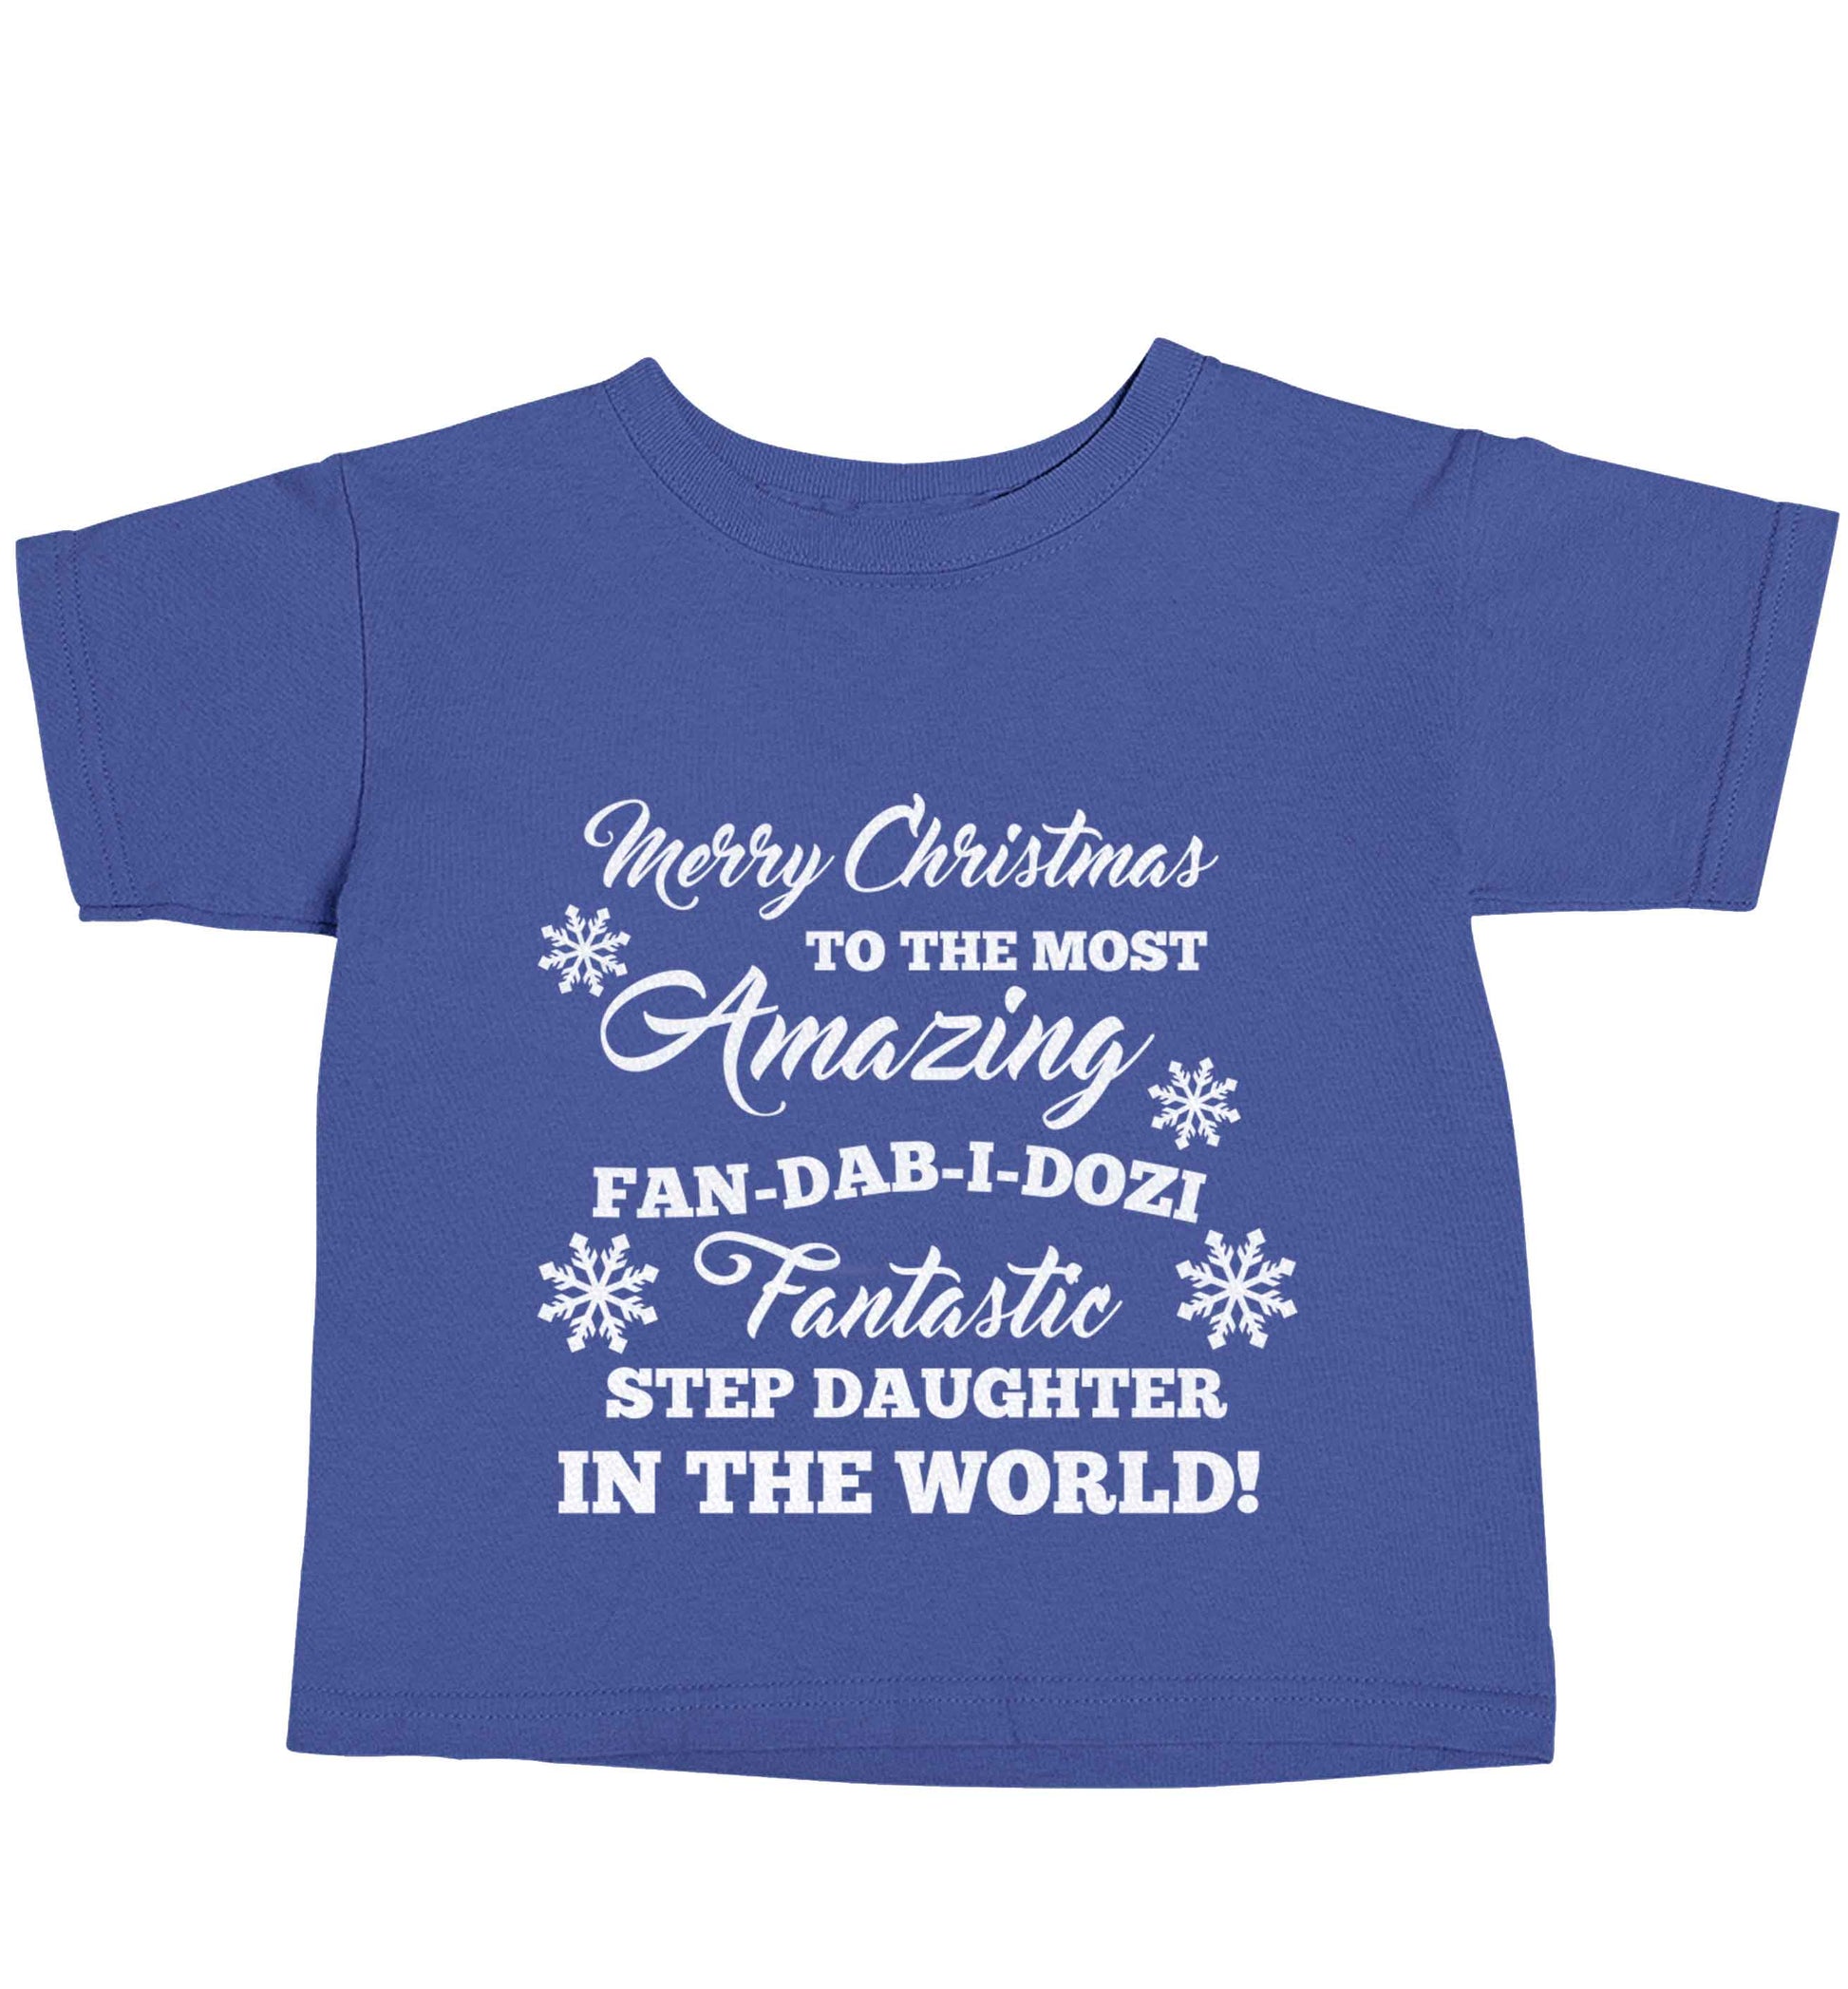 Merry Christmas to the most amazing fan-dab-i-dozi fantasic Step Daughter in the world blue baby toddler Tshirt 2 Years